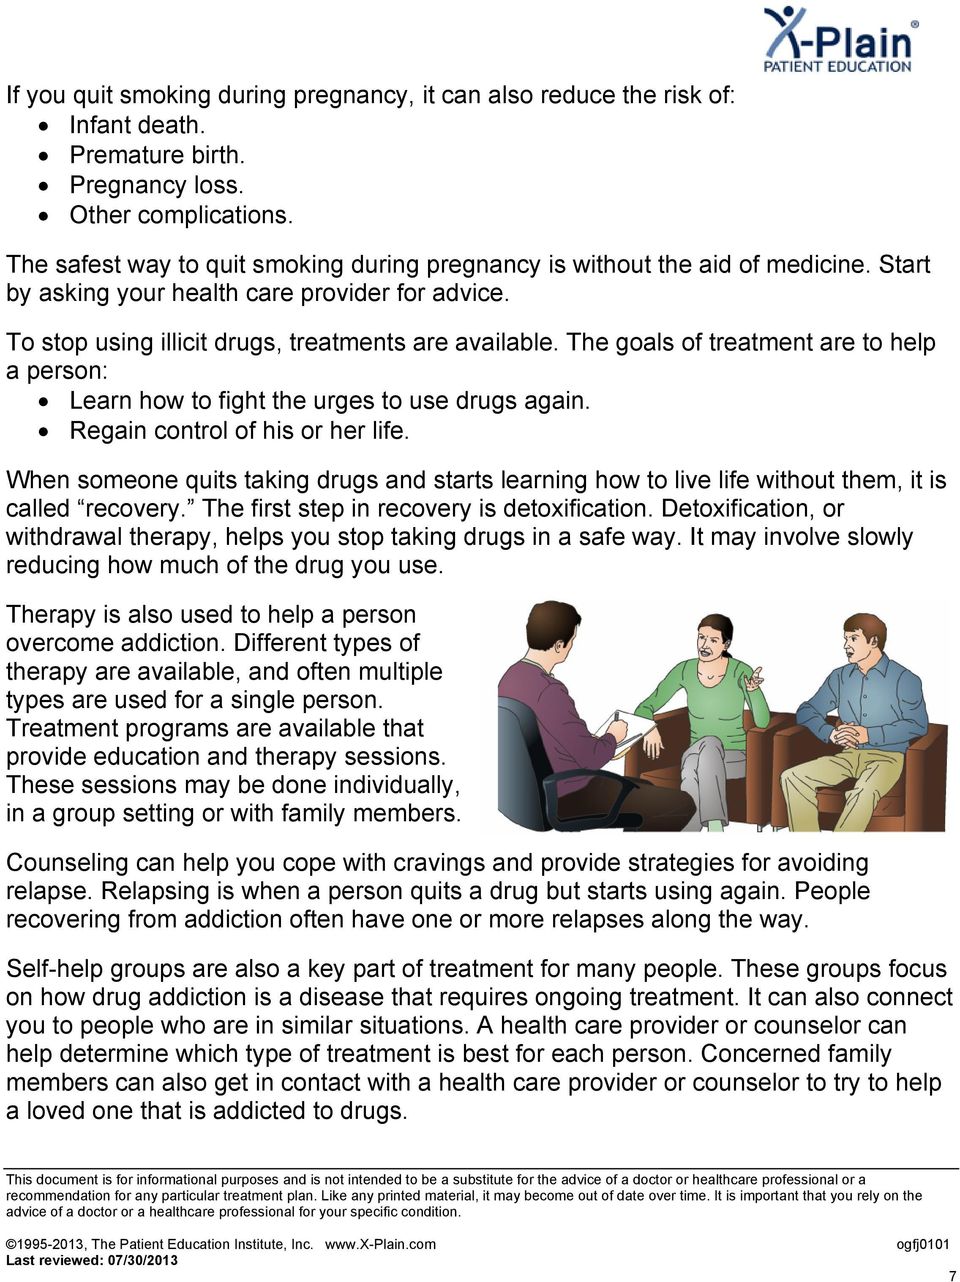 The goals of treatment are to help a person: Learn how to fight the urges to use drugs again. Regain control of his or her life.